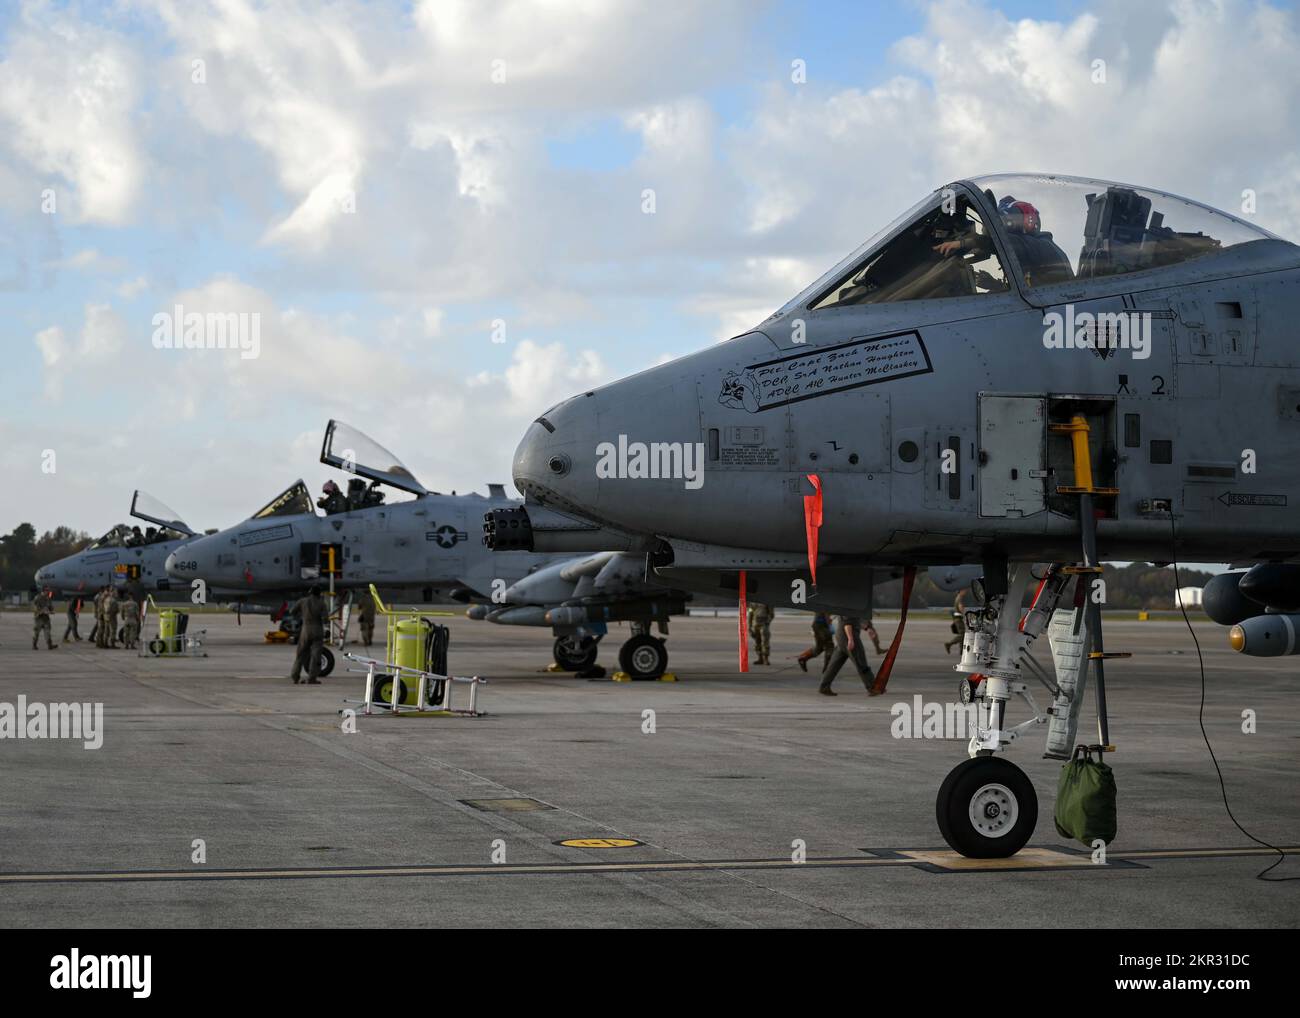 A-10 Thunderbolt IIs from the 354th Fighter Squadron at Davis-Monthan Air Force Base sit on the flightline at Naval Air Station Oceana, Virginia, during Bushwhacker 22-07, Nov. 3, 2022. Davis-Monthan is an operational, warfighting base with 11,000 total force Airmen that directly support six combatant commanders across the globe every day. (U.S. Air Force photo by Airman 1st Class Paige Weldon) Stock Photo